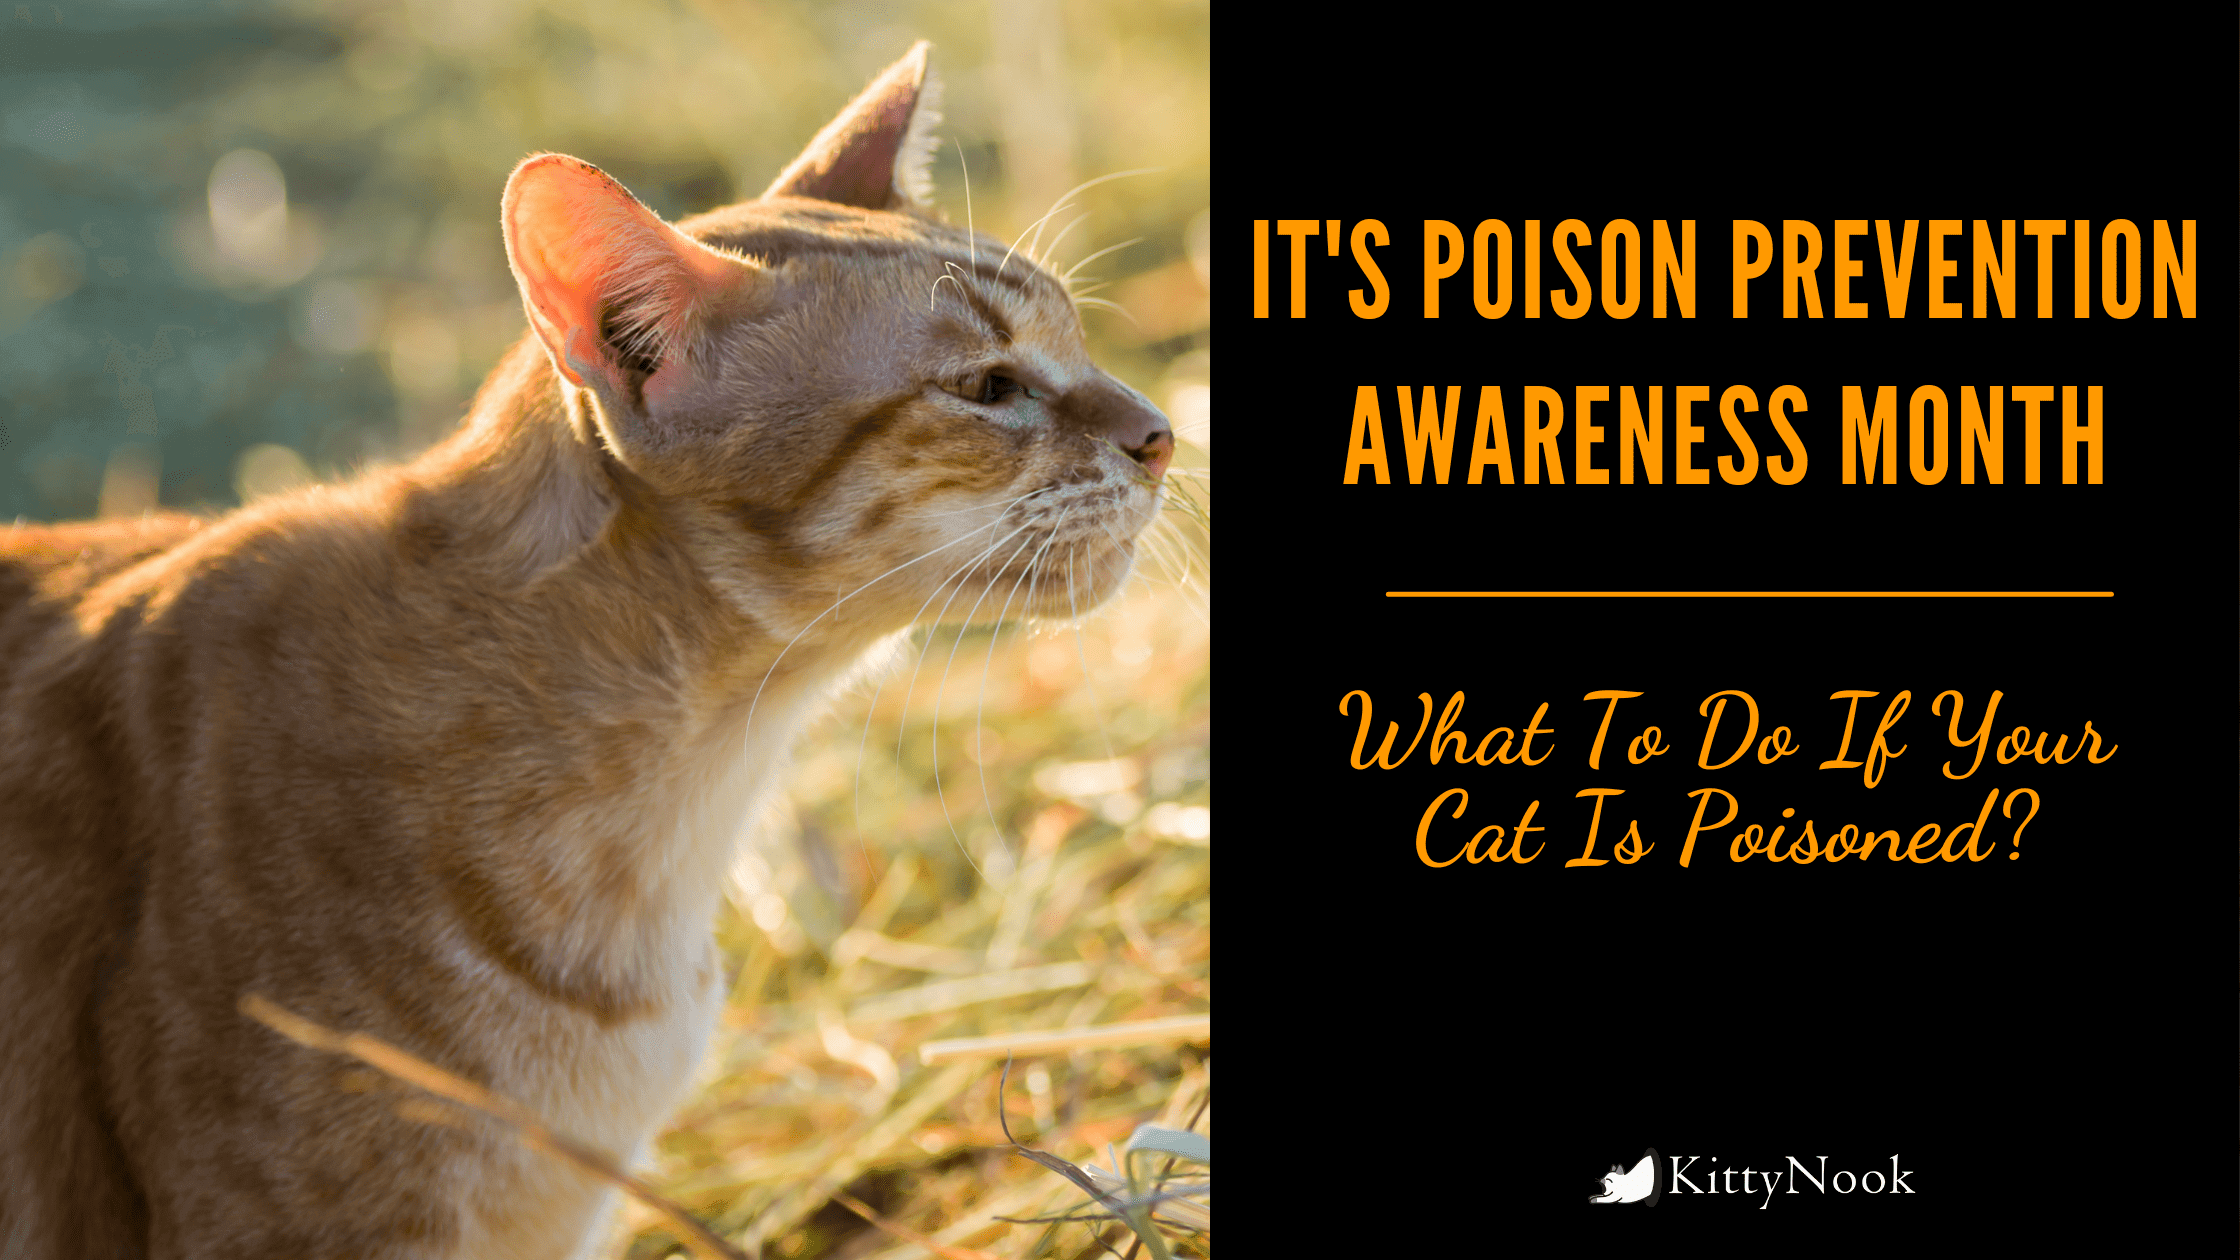 Poison Prevention Awareness Month: What To Do When Your Cat Is Poisoned? - KittyNook